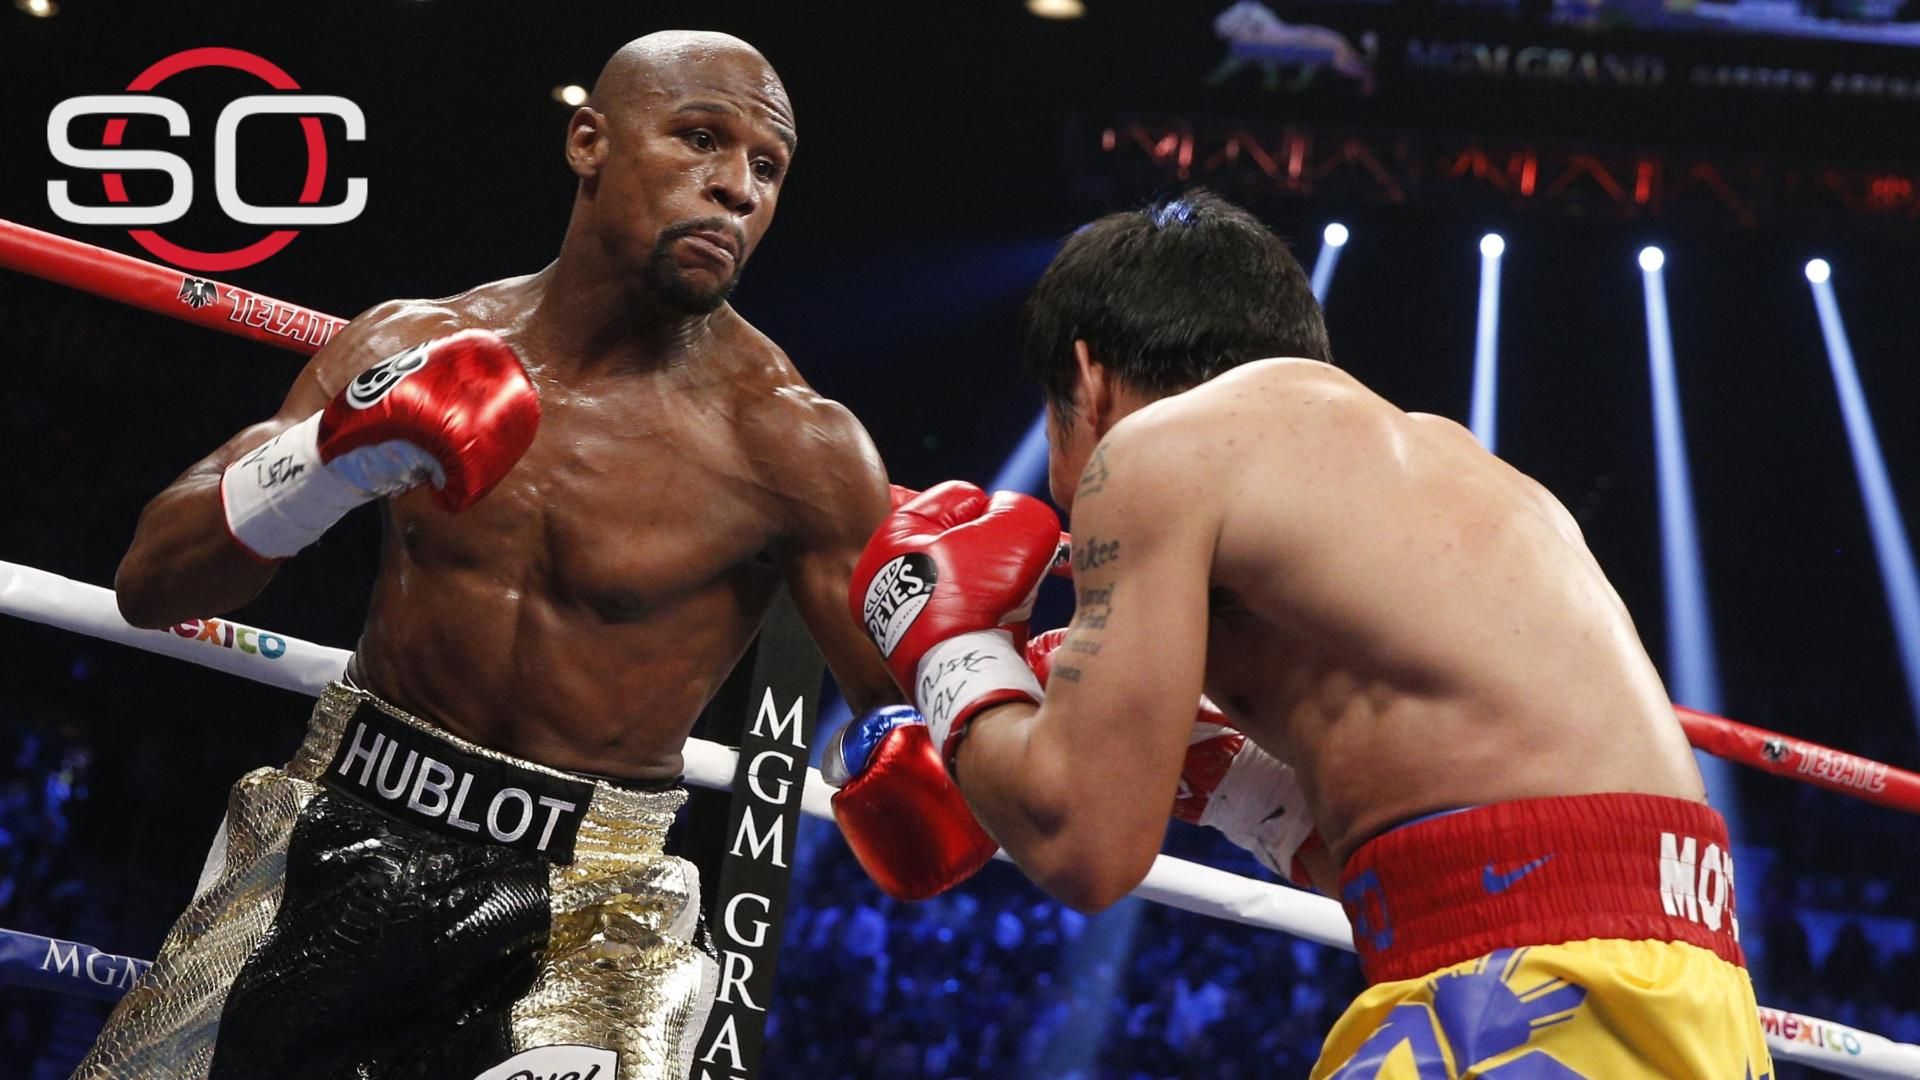 Mayweather used banned IV before Pacquiao fight